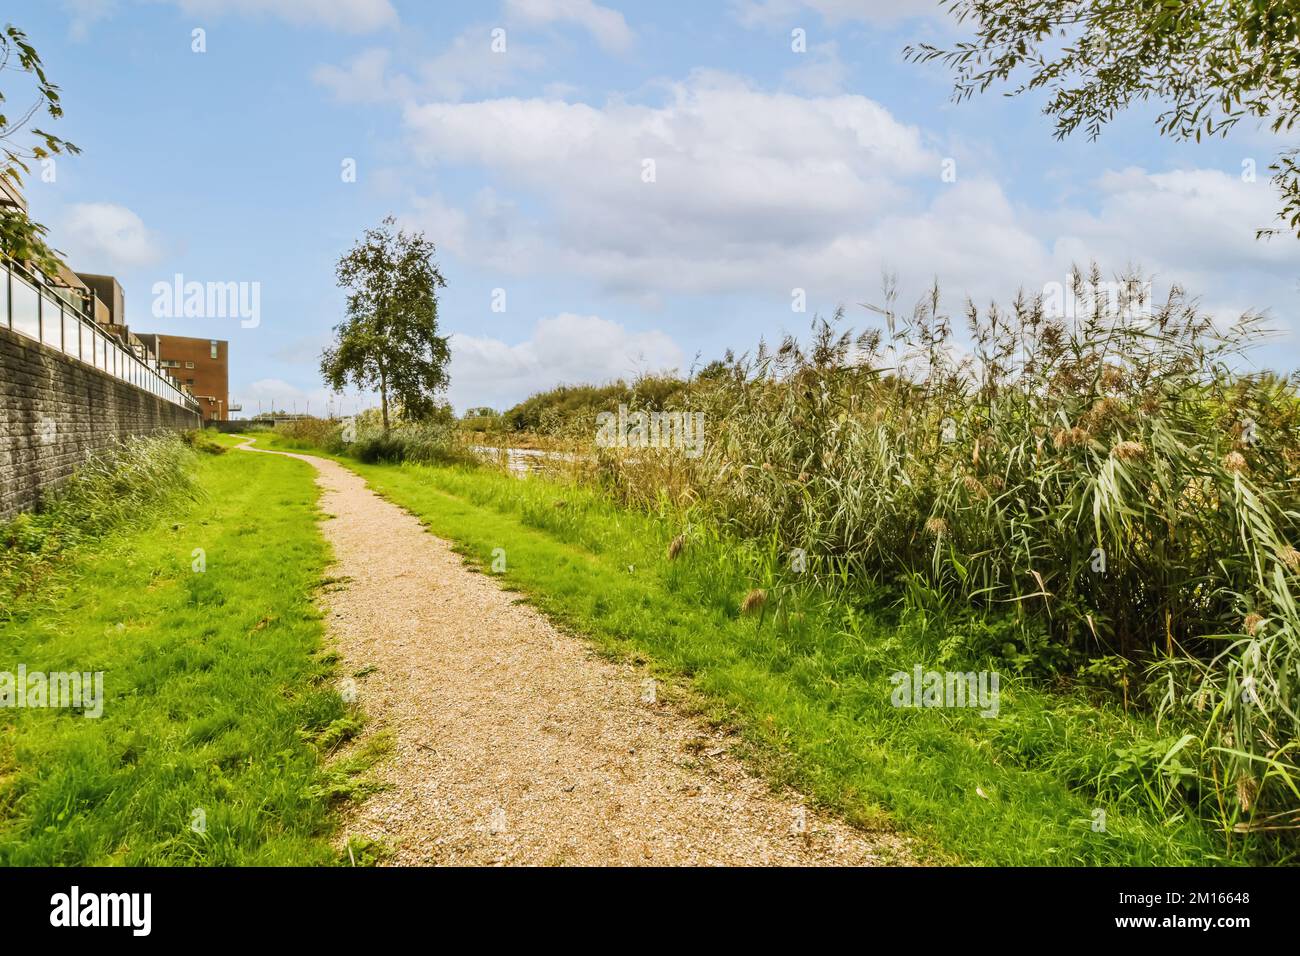 a path leading to an old brick building in the countryside, with green grass and trees on either side stock photo Stock Photo